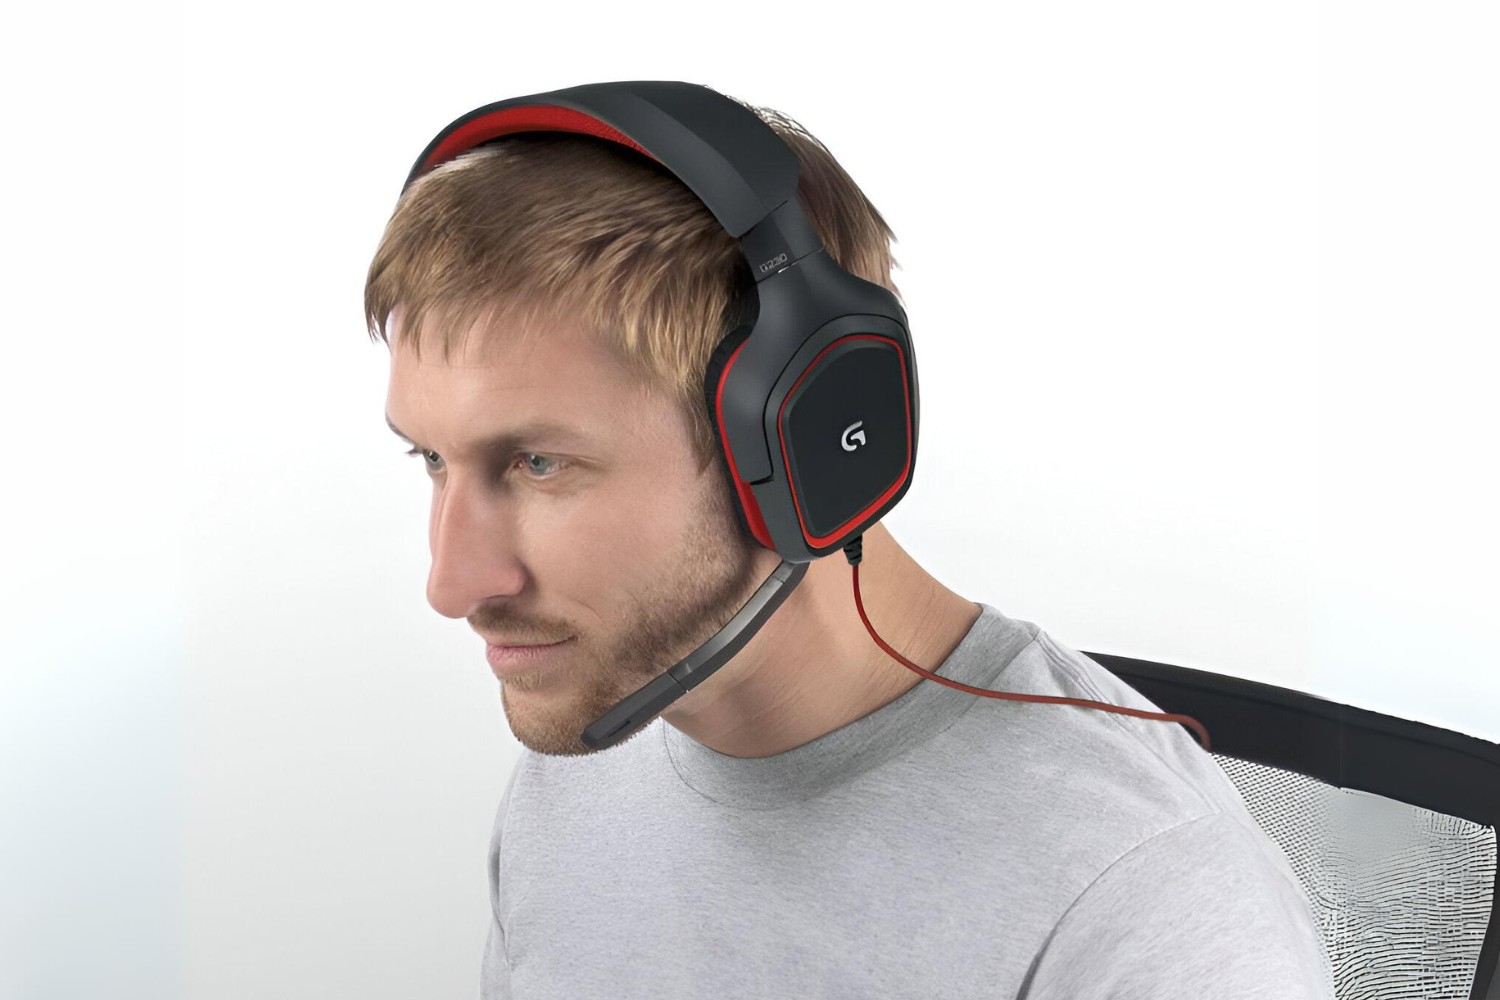 How To Get The LG230 Gaming Headset With Mic To Work